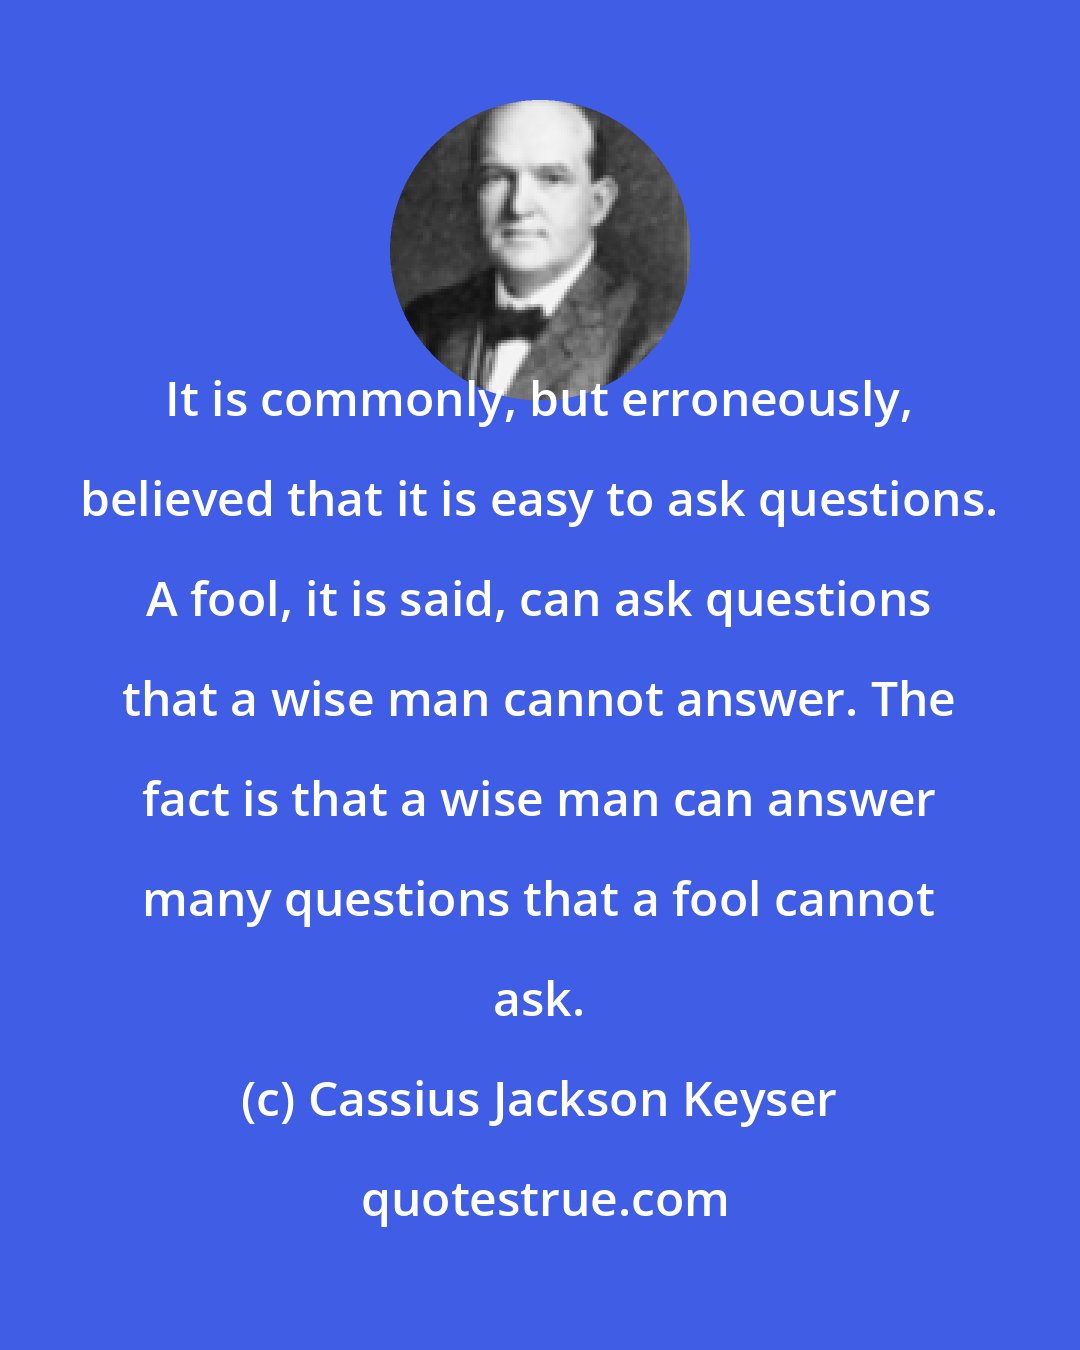 Cassius Jackson Keyser: It is commonly, but erroneously, believed that it is easy to ask questions. A fool, it is said, can ask questions that a wise man cannot answer. The fact is that a wise man can answer many questions that a fool cannot ask.